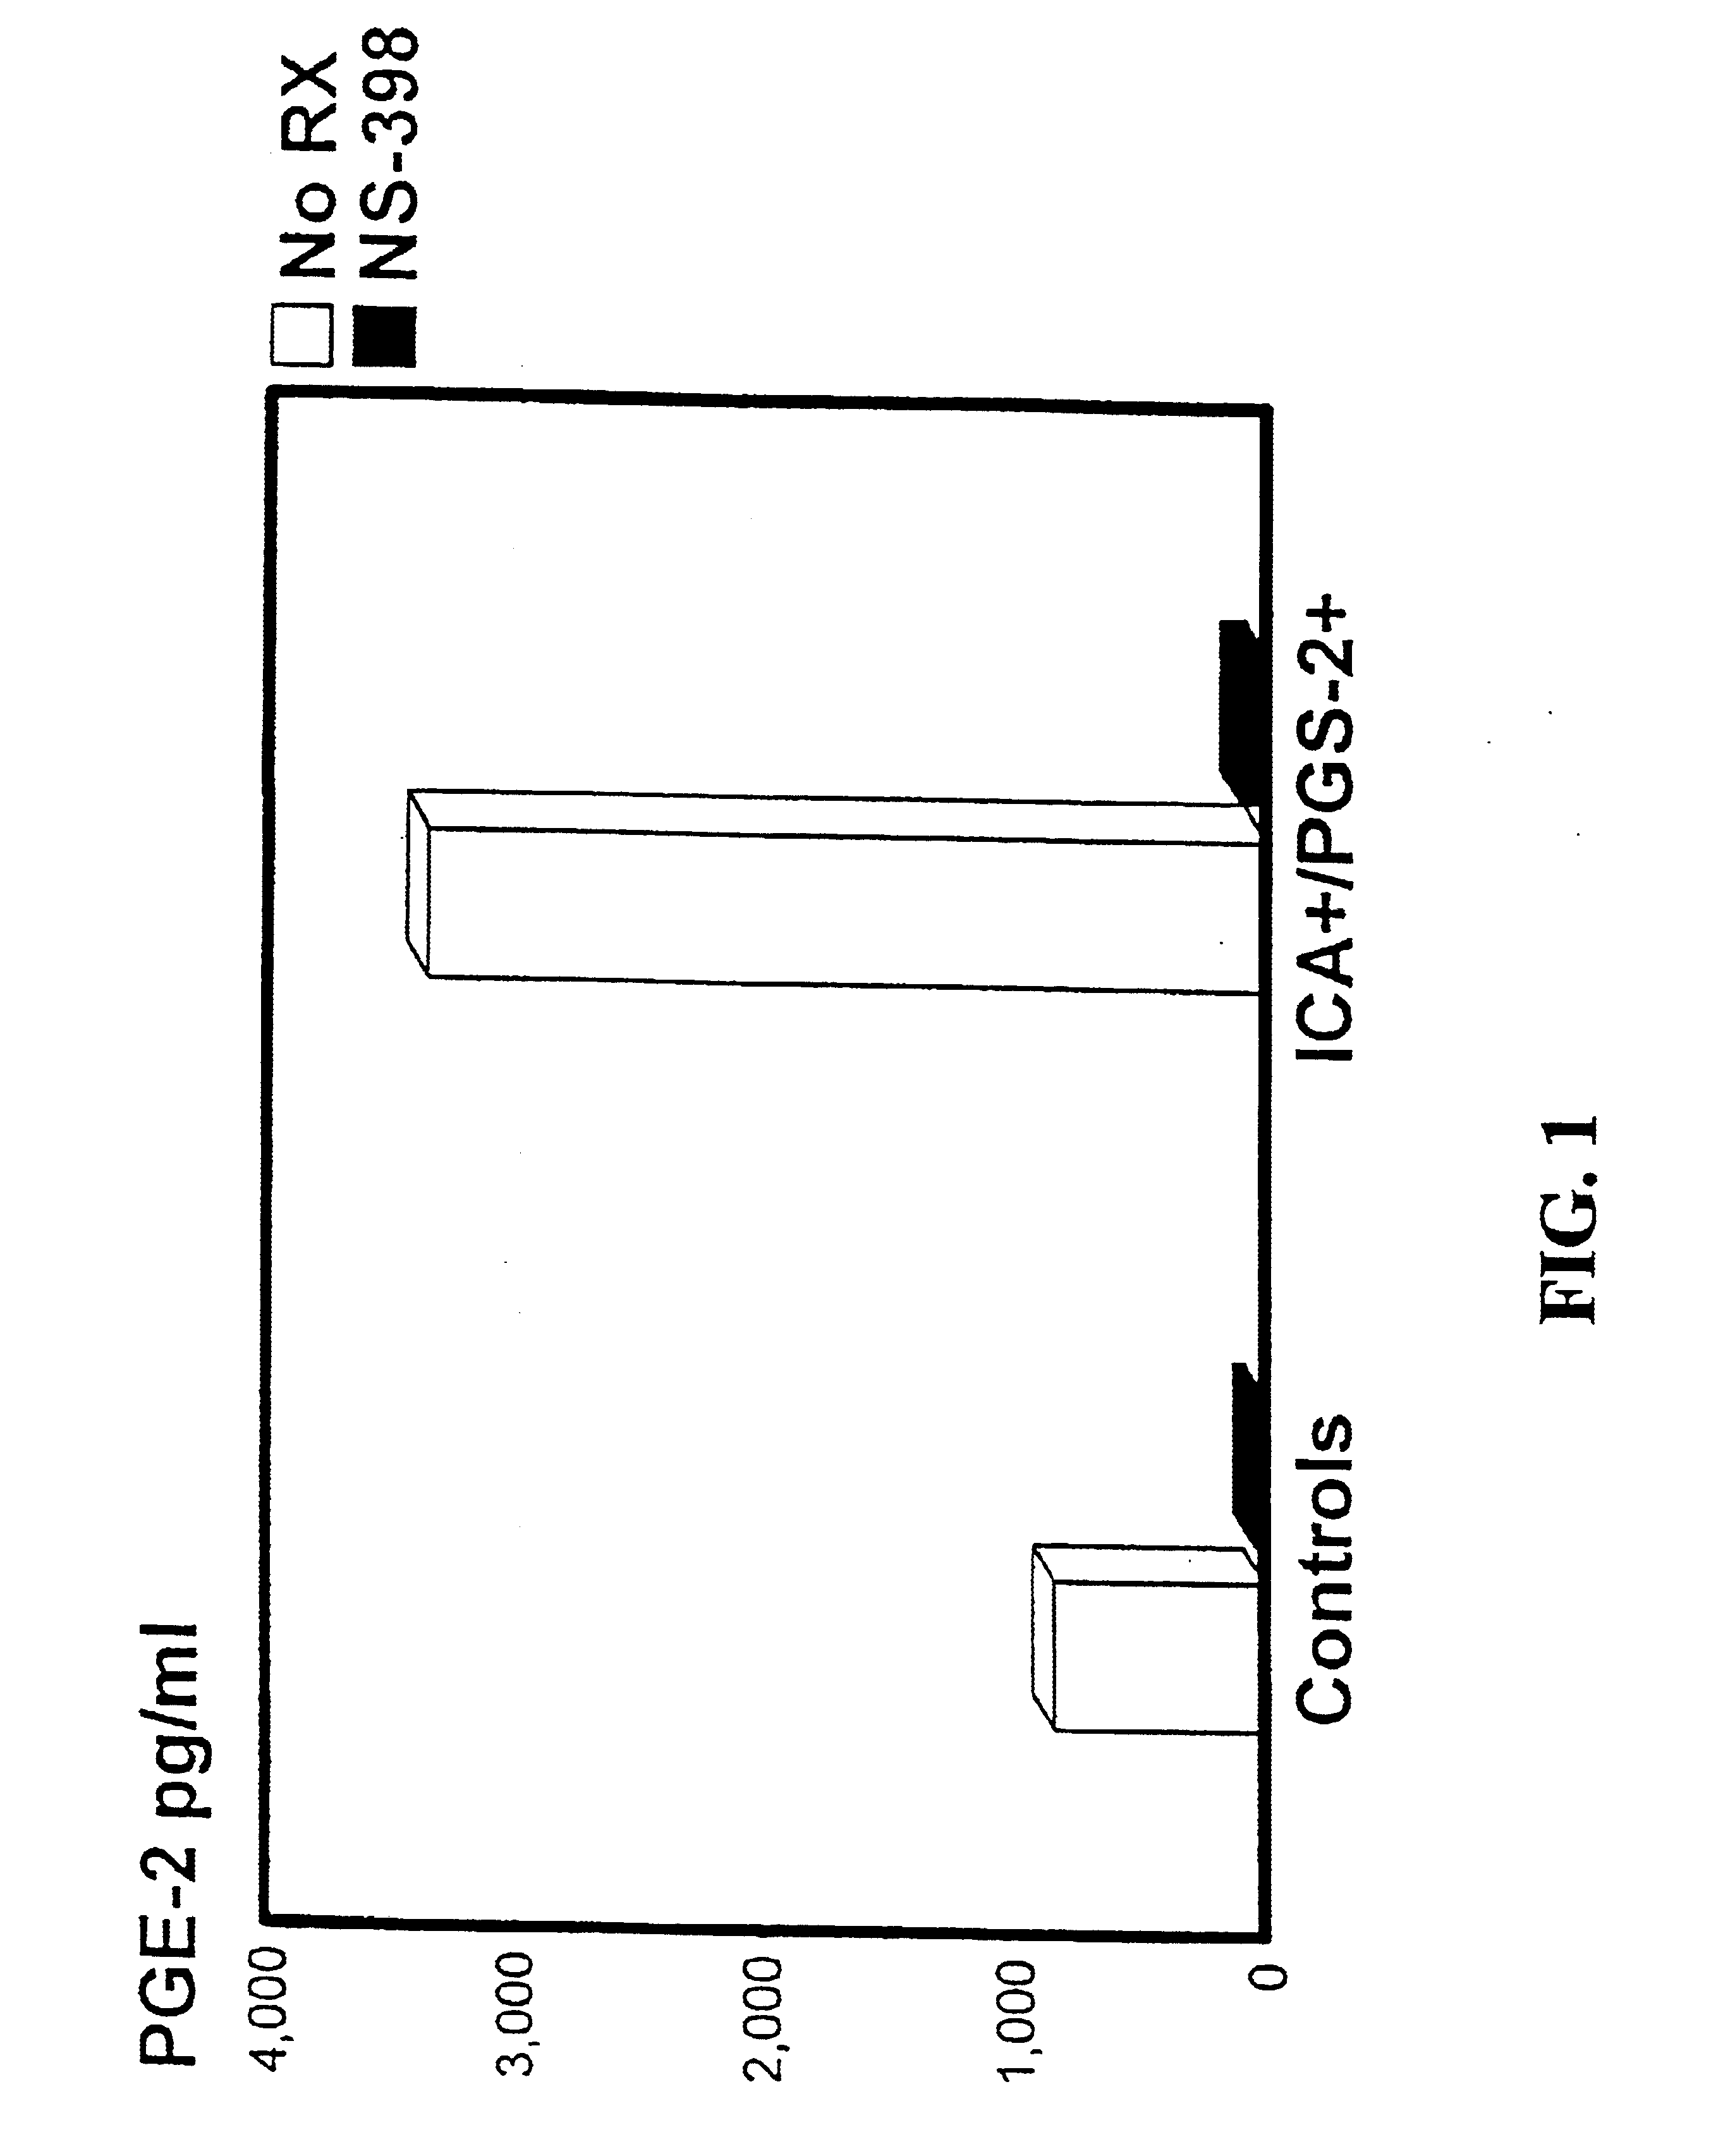 Materials and methods for detection and treatment of immune system dysfunctions